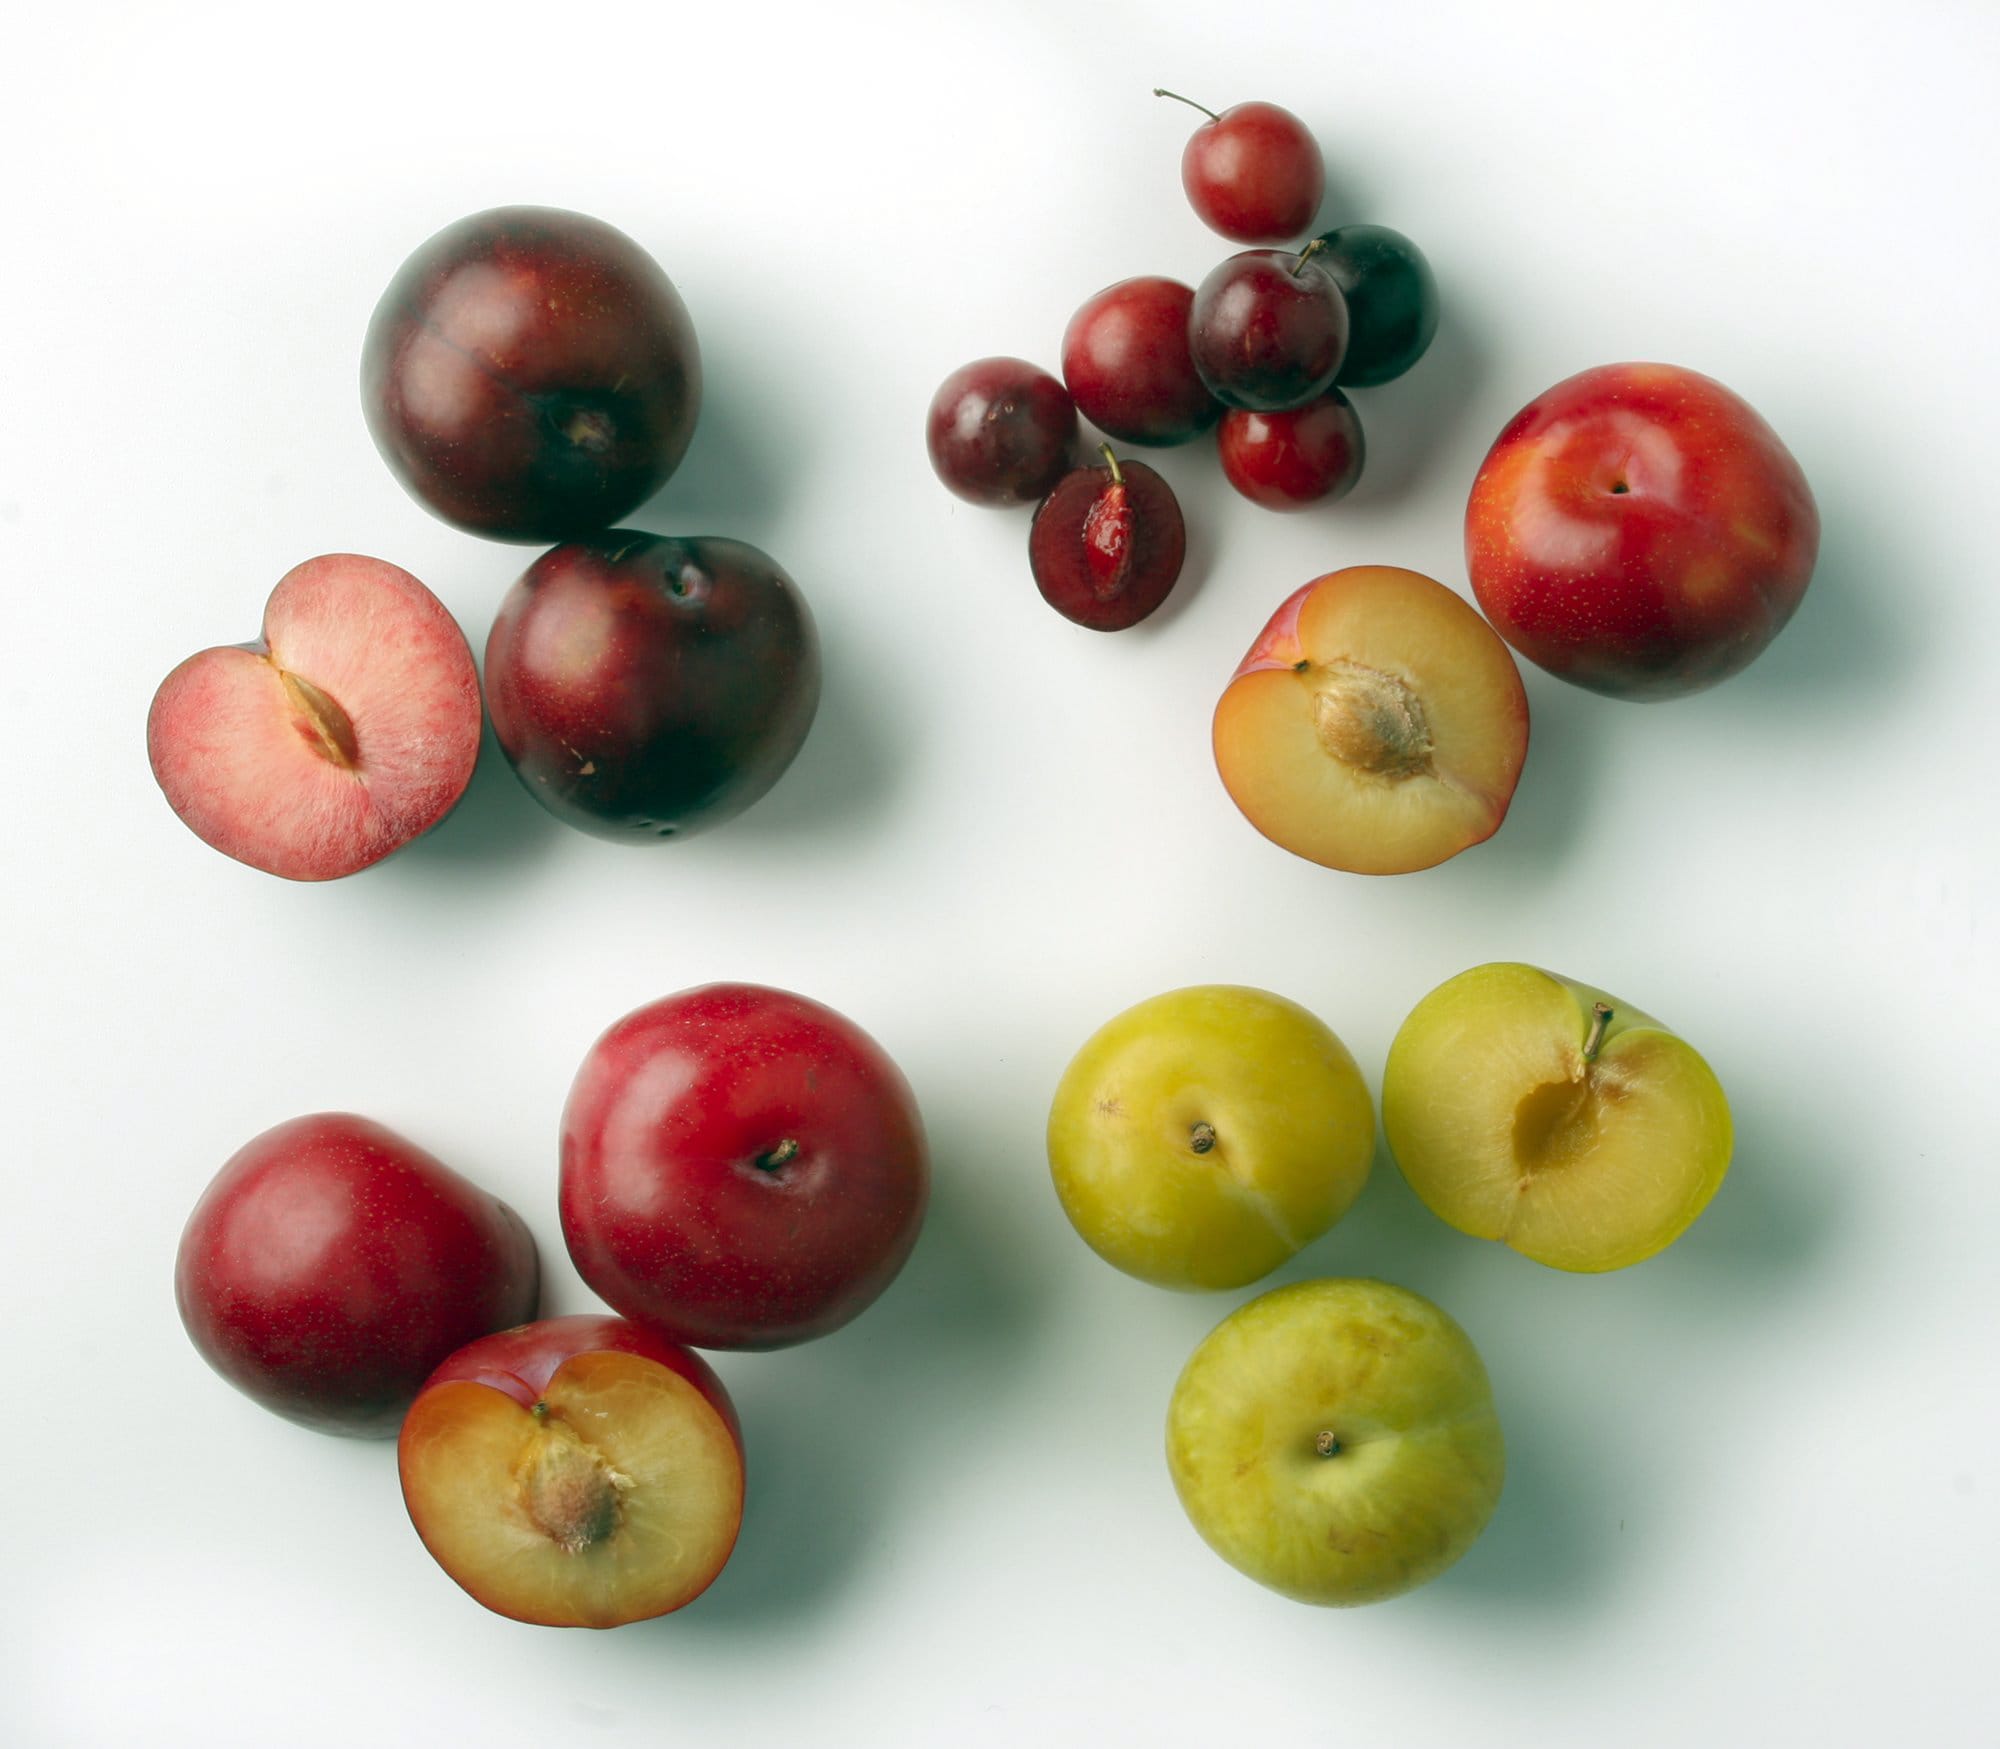 Plums can be surprising. Will the one you sink your teeth into be tart or sweet? There are no guarantees, but there are a few hints. Clockwise from top left: Purple plums, cherry plums, red plums, dragon plums and tree-ripe plums. Illustrates FOOD-PLUMS (category d), by Bonnie S. Benwick &not;&copy; 2005, The Washington Post. Moved Wednesday, Aug. 10, 2005.